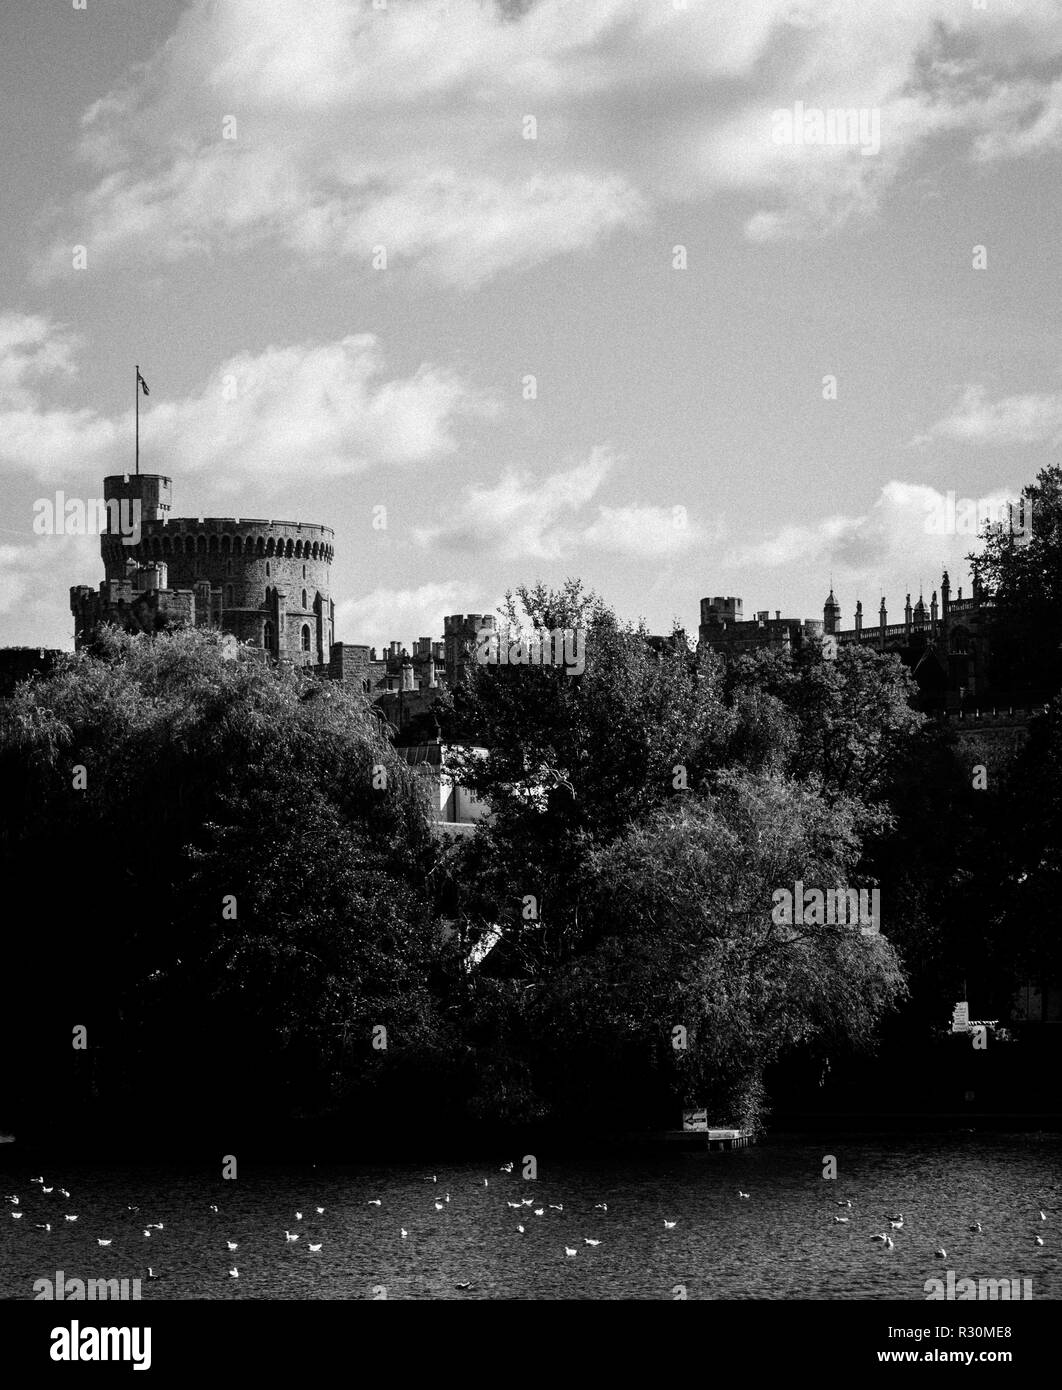 Dramatic, Black and White Photograph of Windsor Castle, on The River Thames, with Swans, Windsor, Berkshire, England, UK, GB. Stock Photo